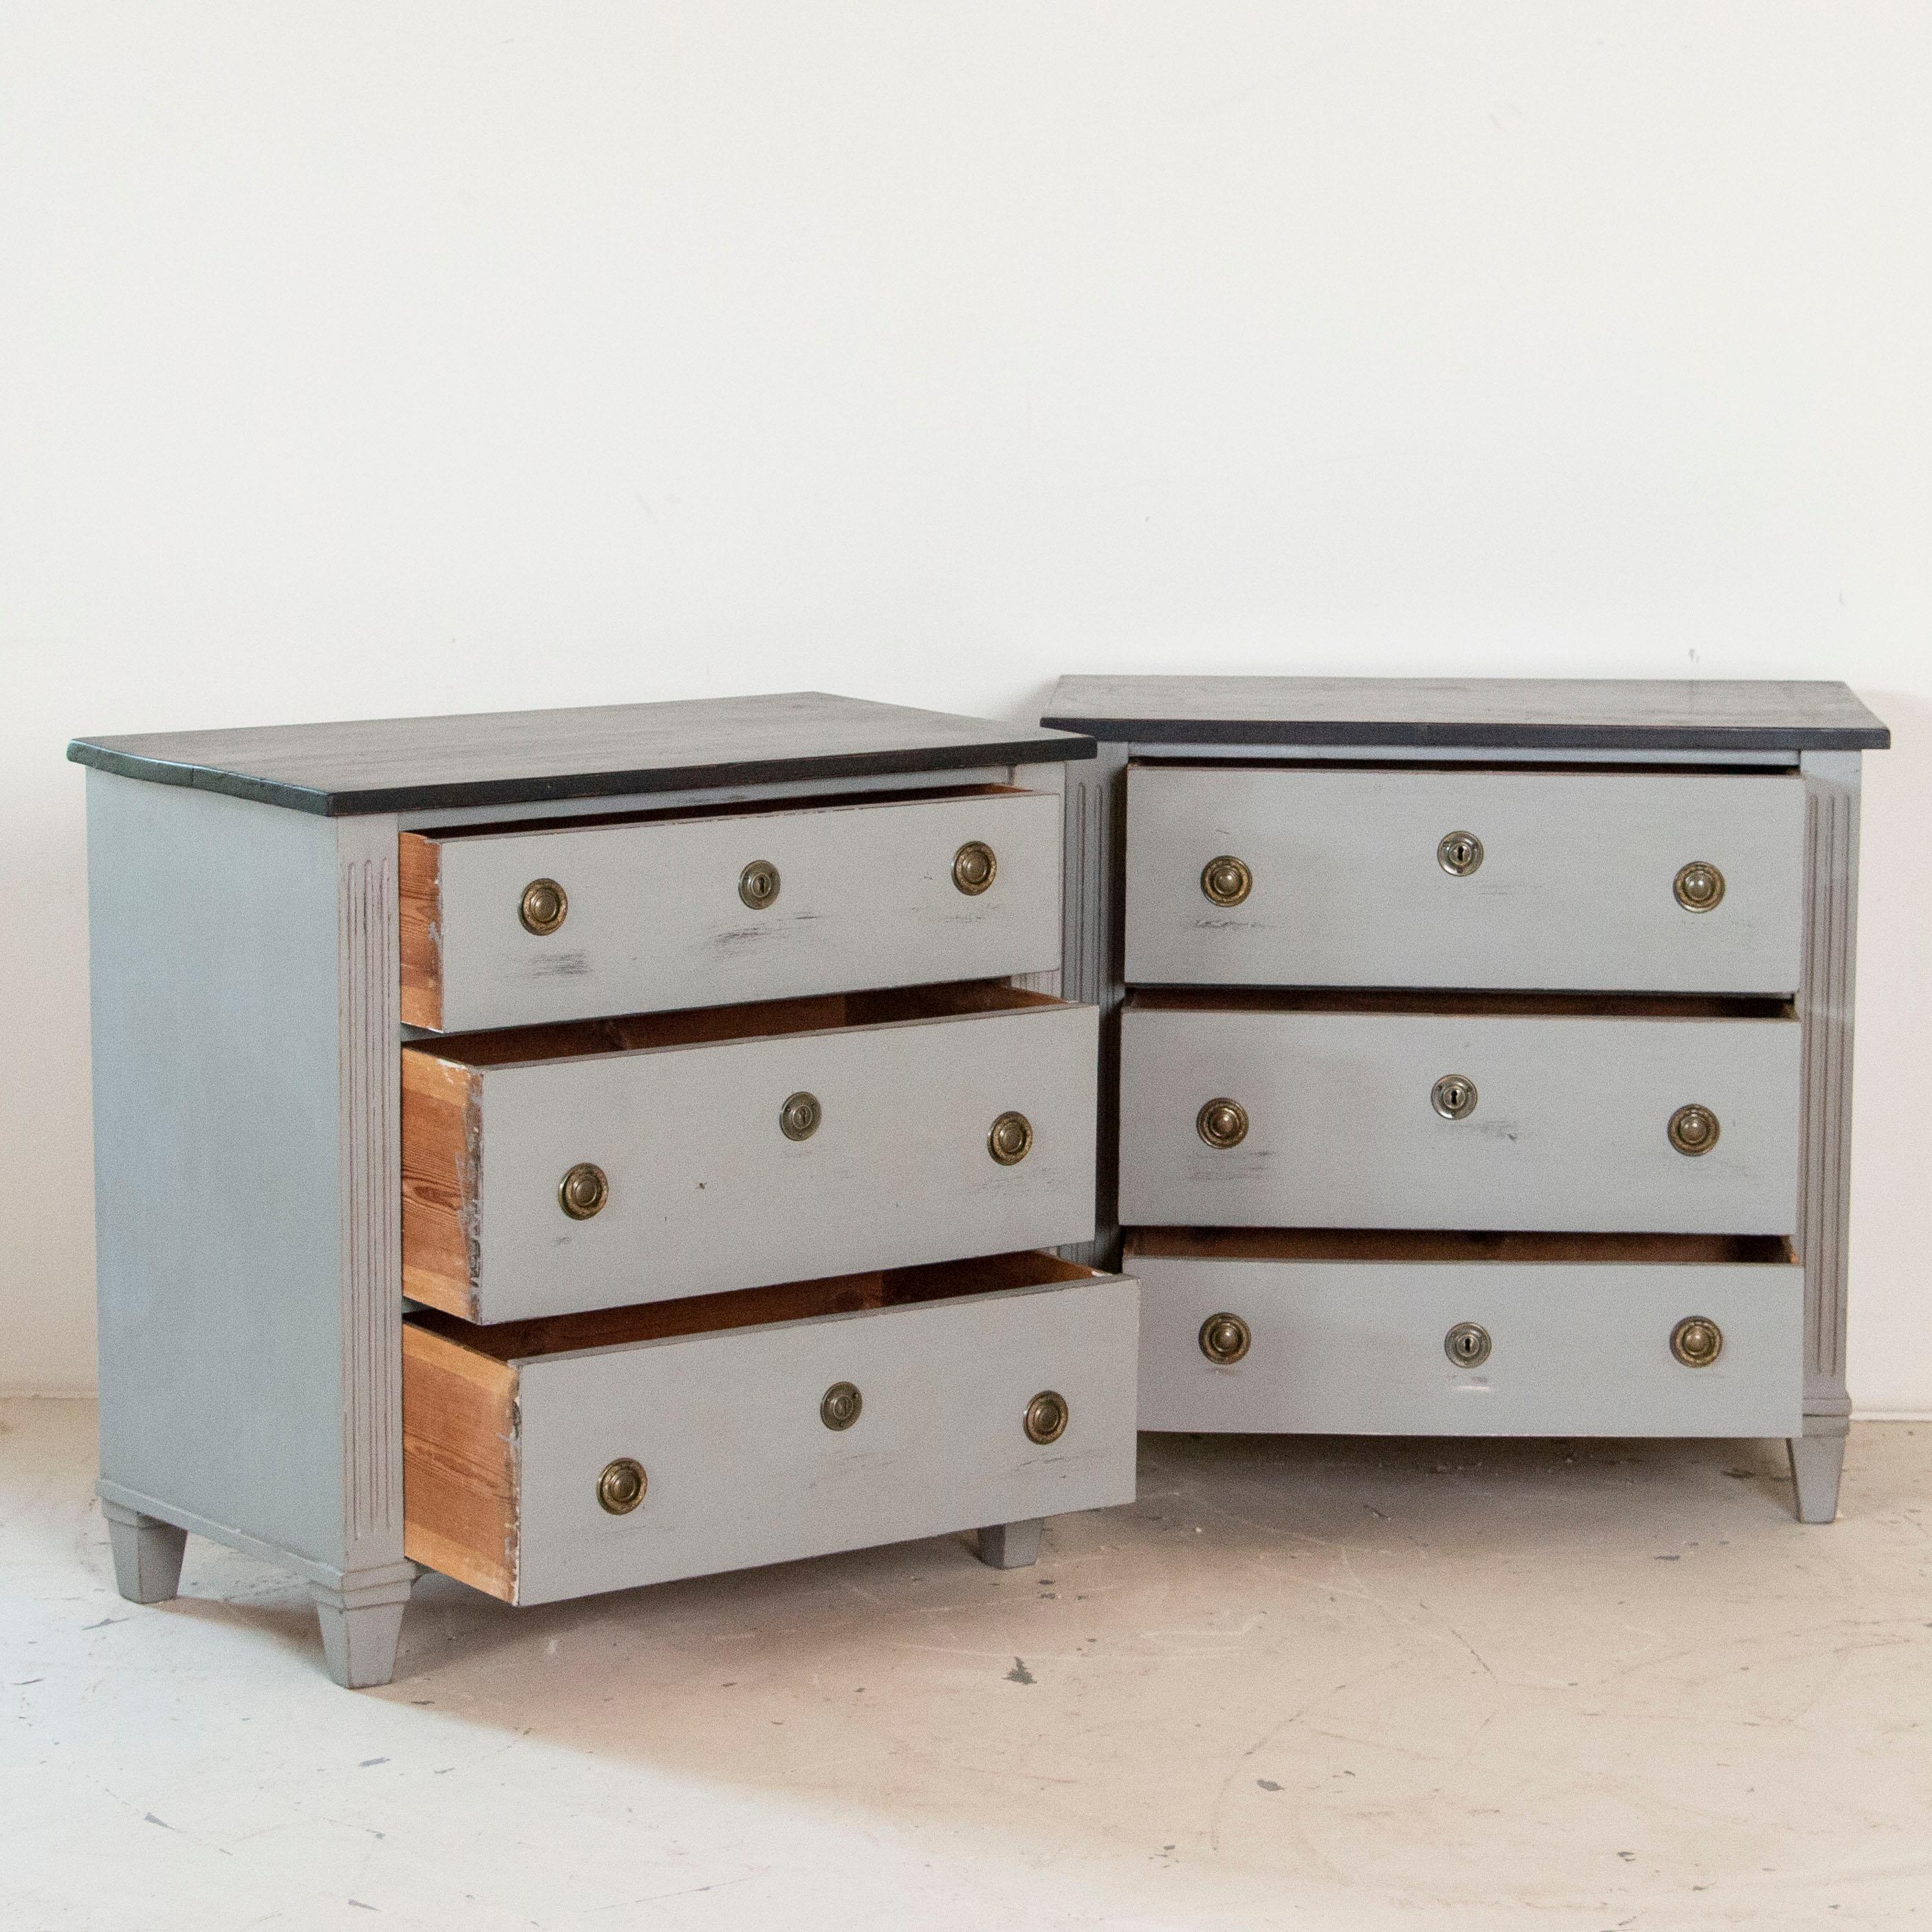 Finding a matched pair of nightstands can be challenging, which makes this pair of Gustavian style chest of drawers an excellent find. Both have simple, clean lines and were painted later with soft gray paint and black tops, fitting of their Swedish